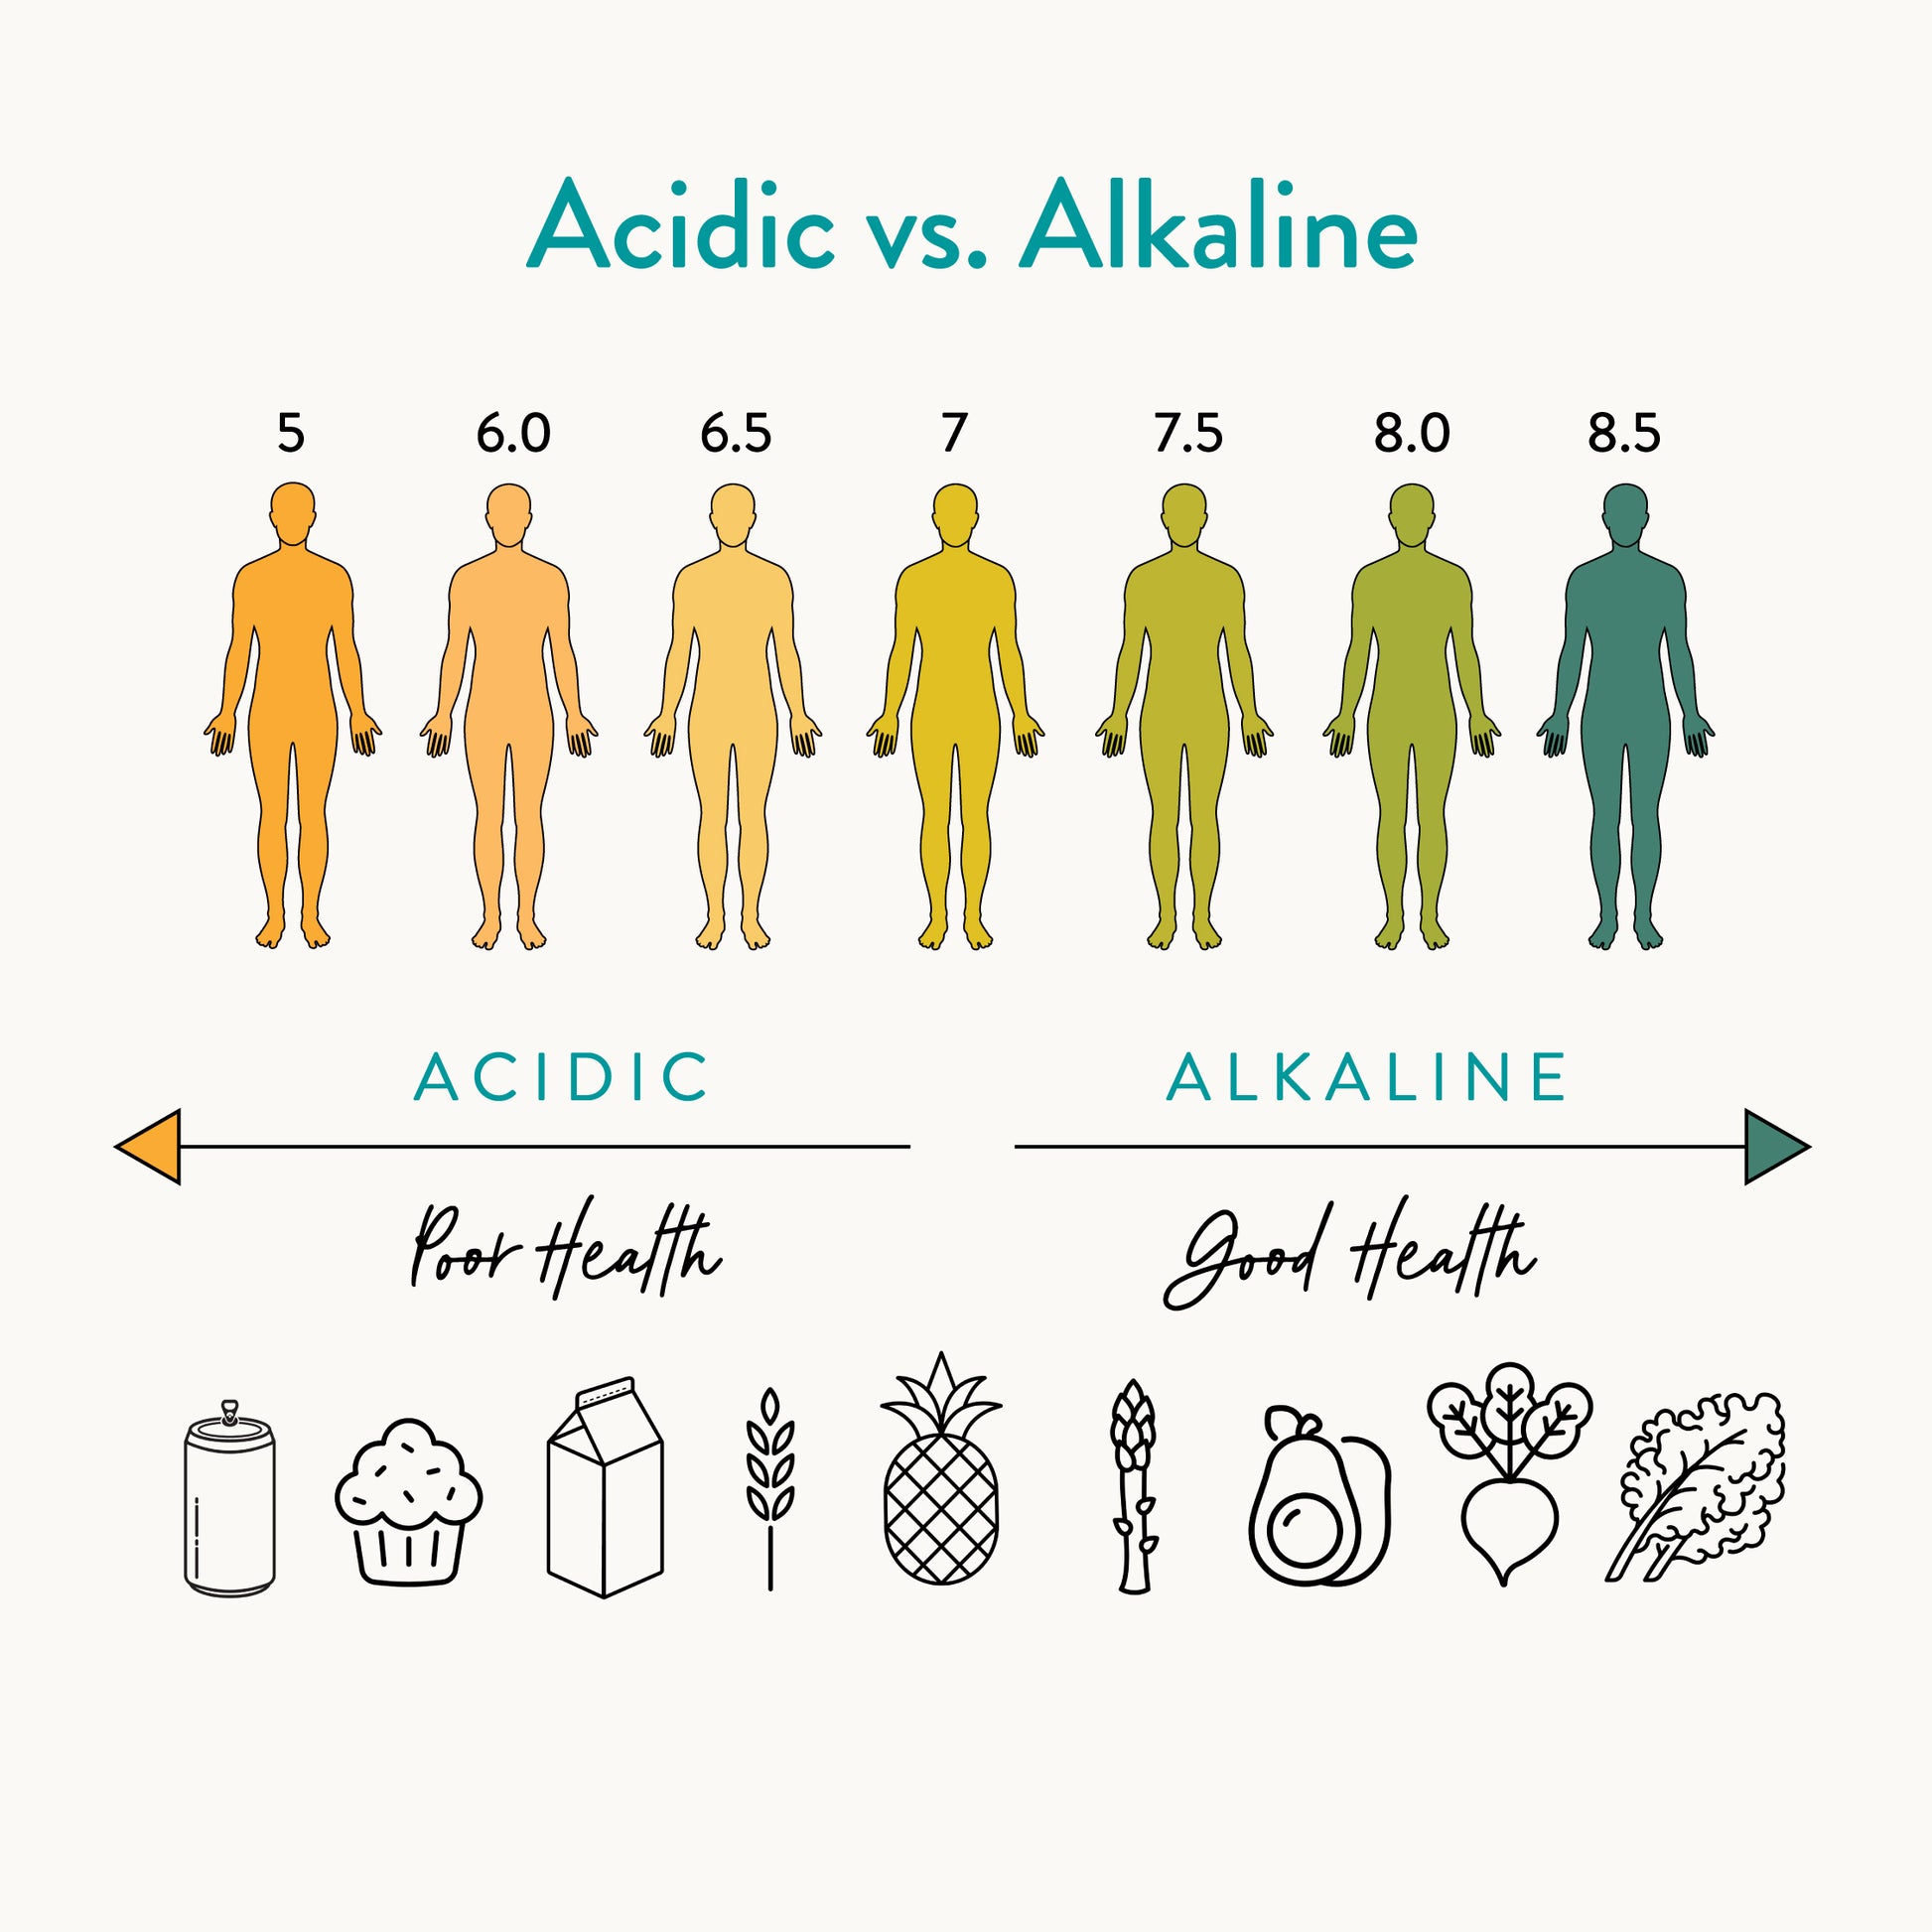 Acid vs. Alkaline chart with examples of foods that increase or decrease alkalinity in the body.